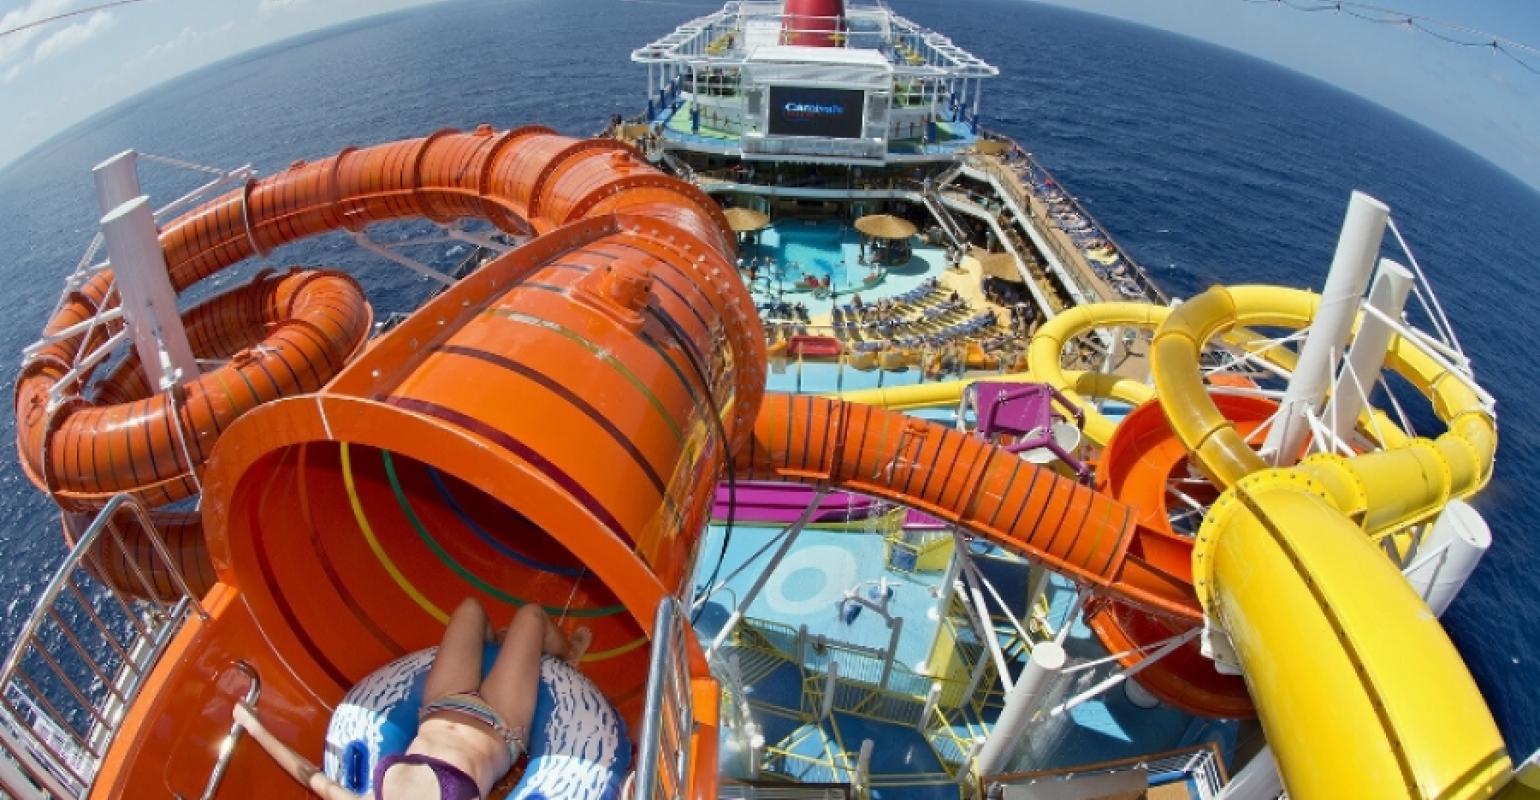 Carnival Vista debuts with IMAX, SkyRide, deck parties and, to come